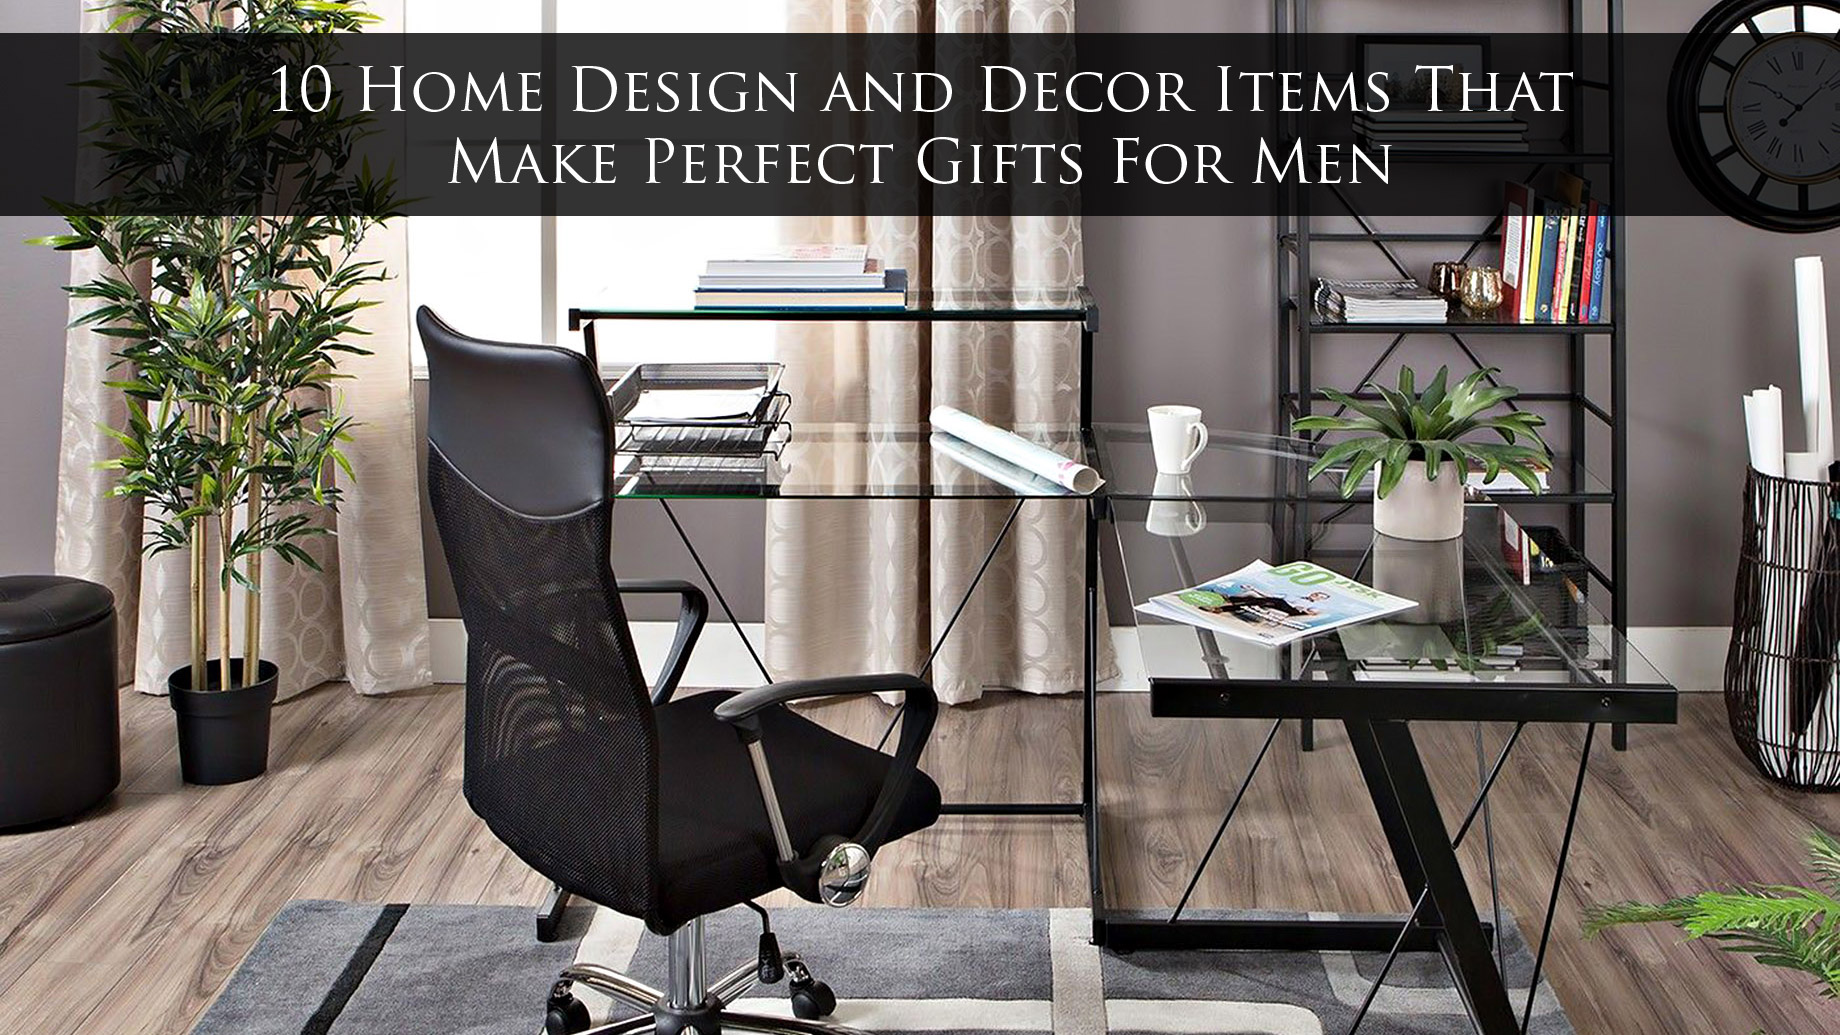 10 Home Design and Decor Items That Make Perfect Gifts For Men